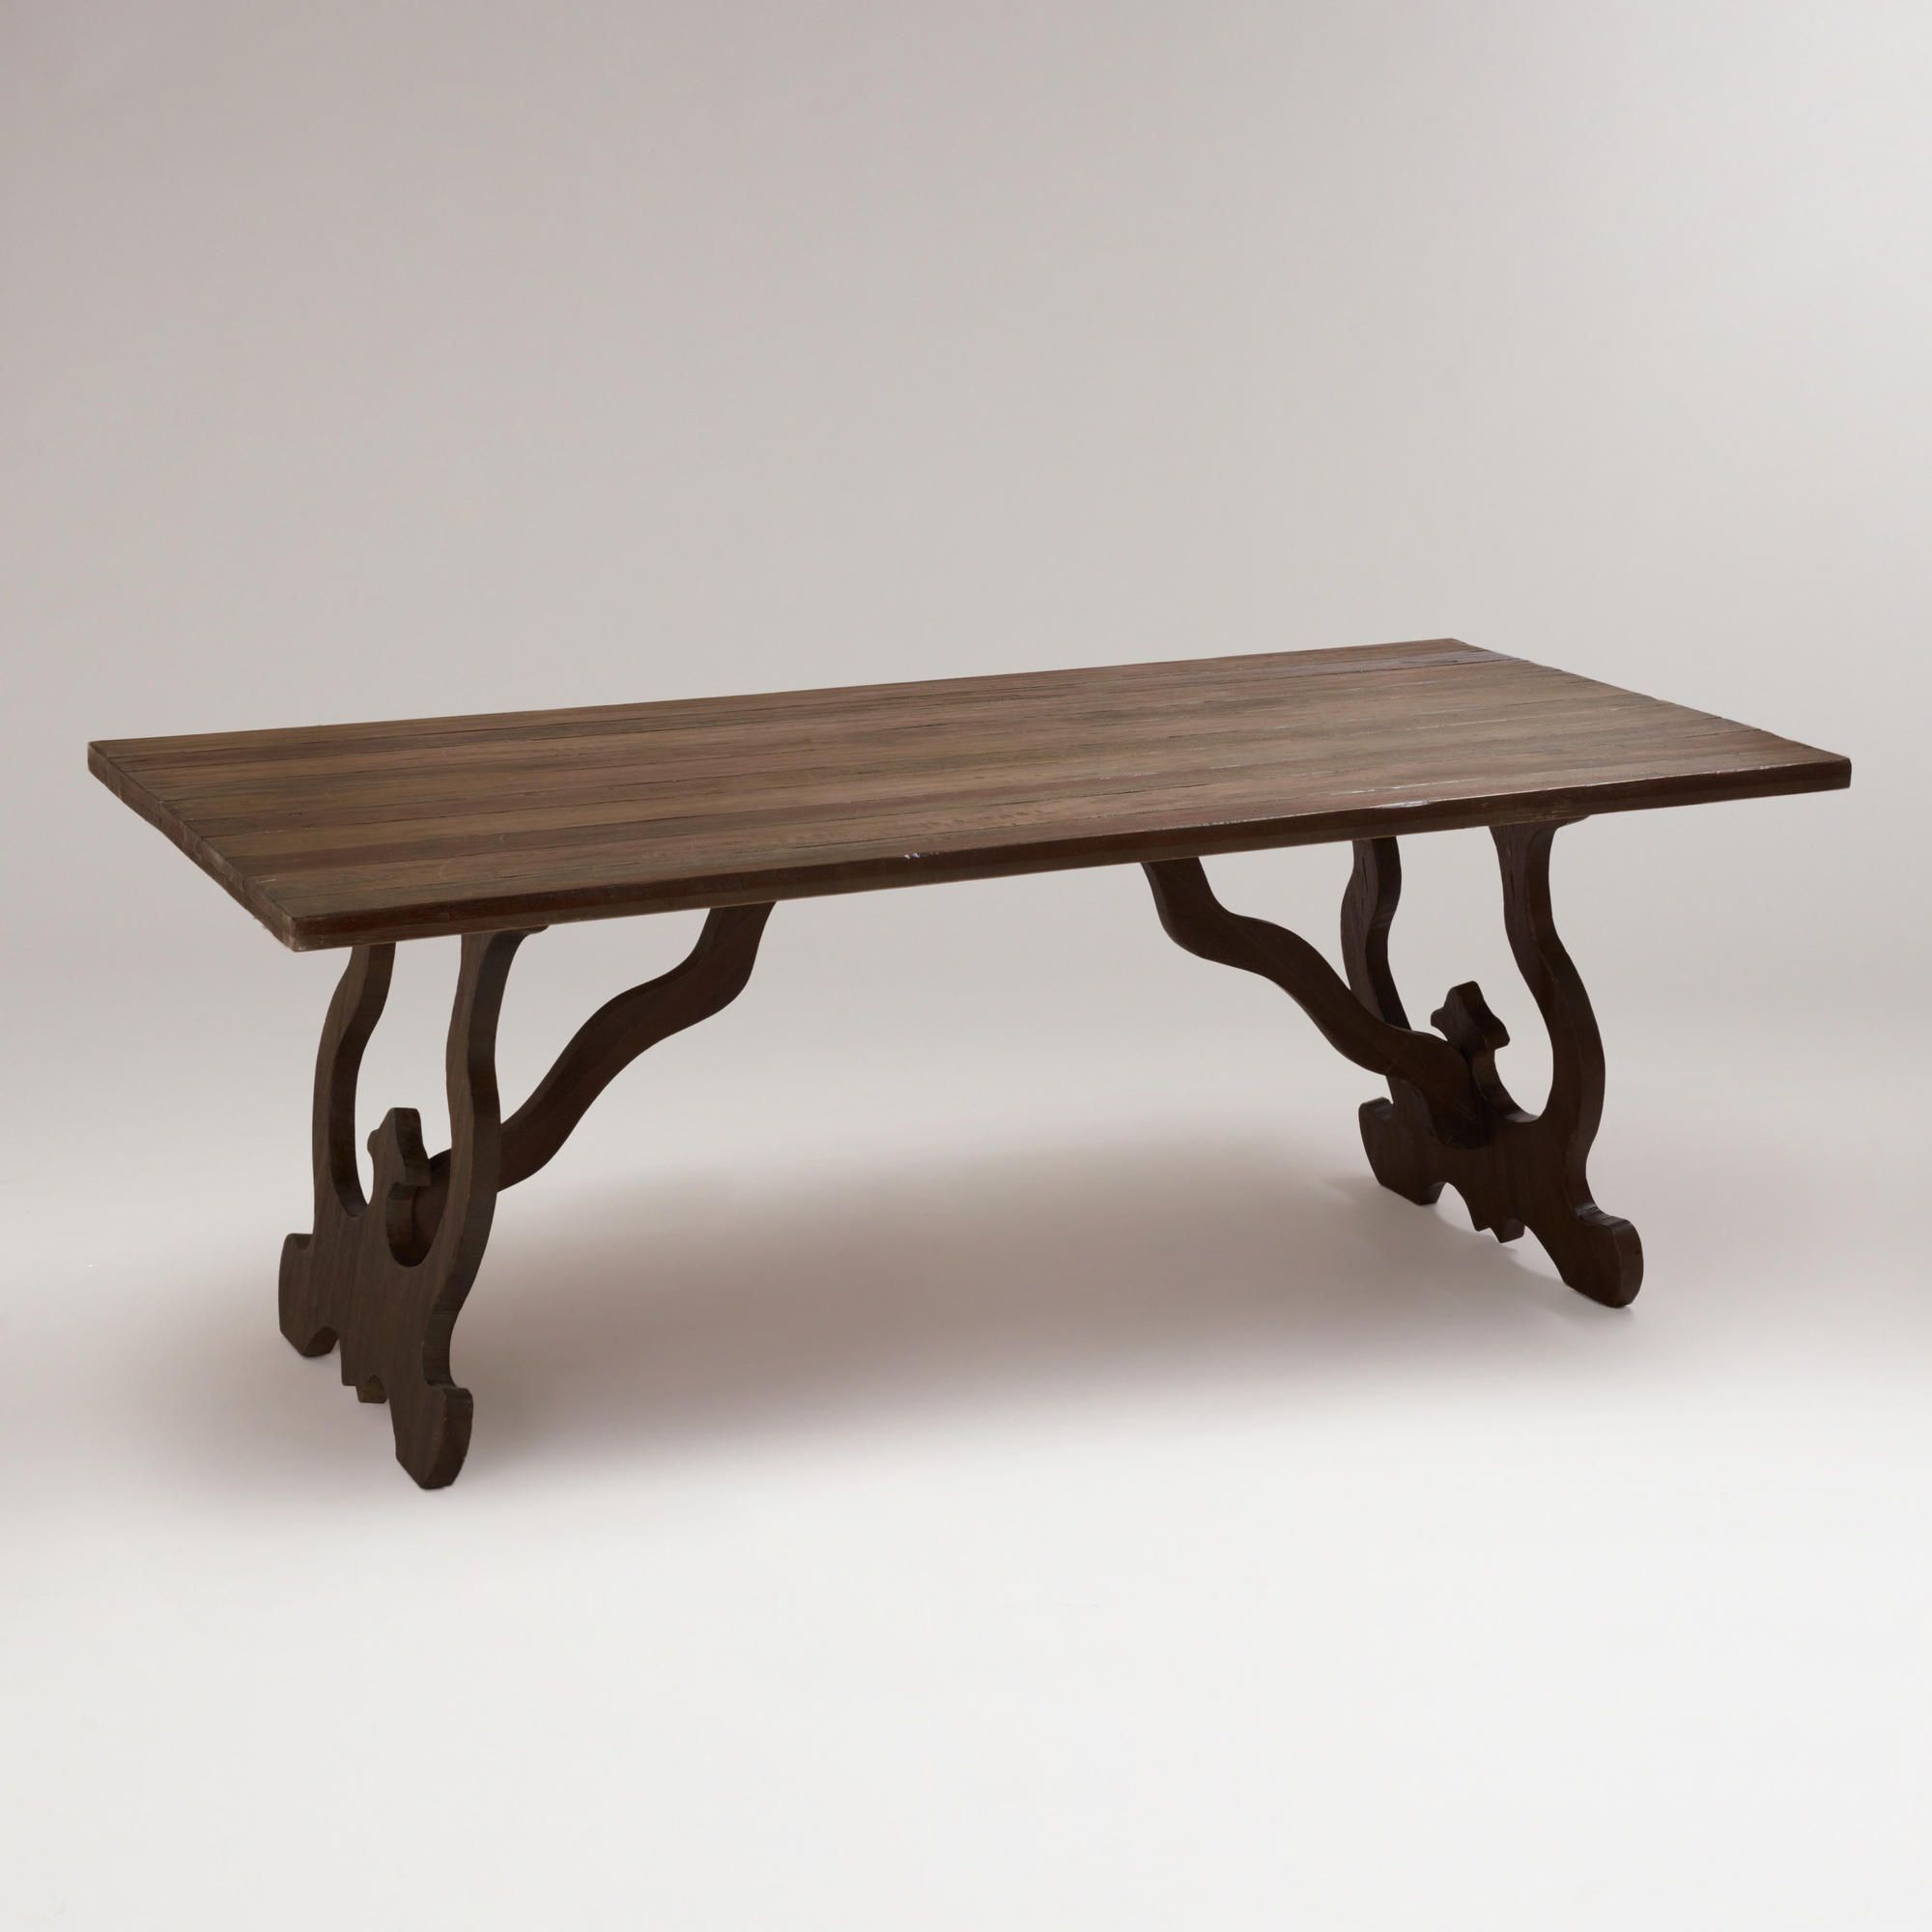 Weathered Gray Romeo Dining Table | World Market | World For Lucille Timberland Wooden Garden Benches (View 16 of 25)